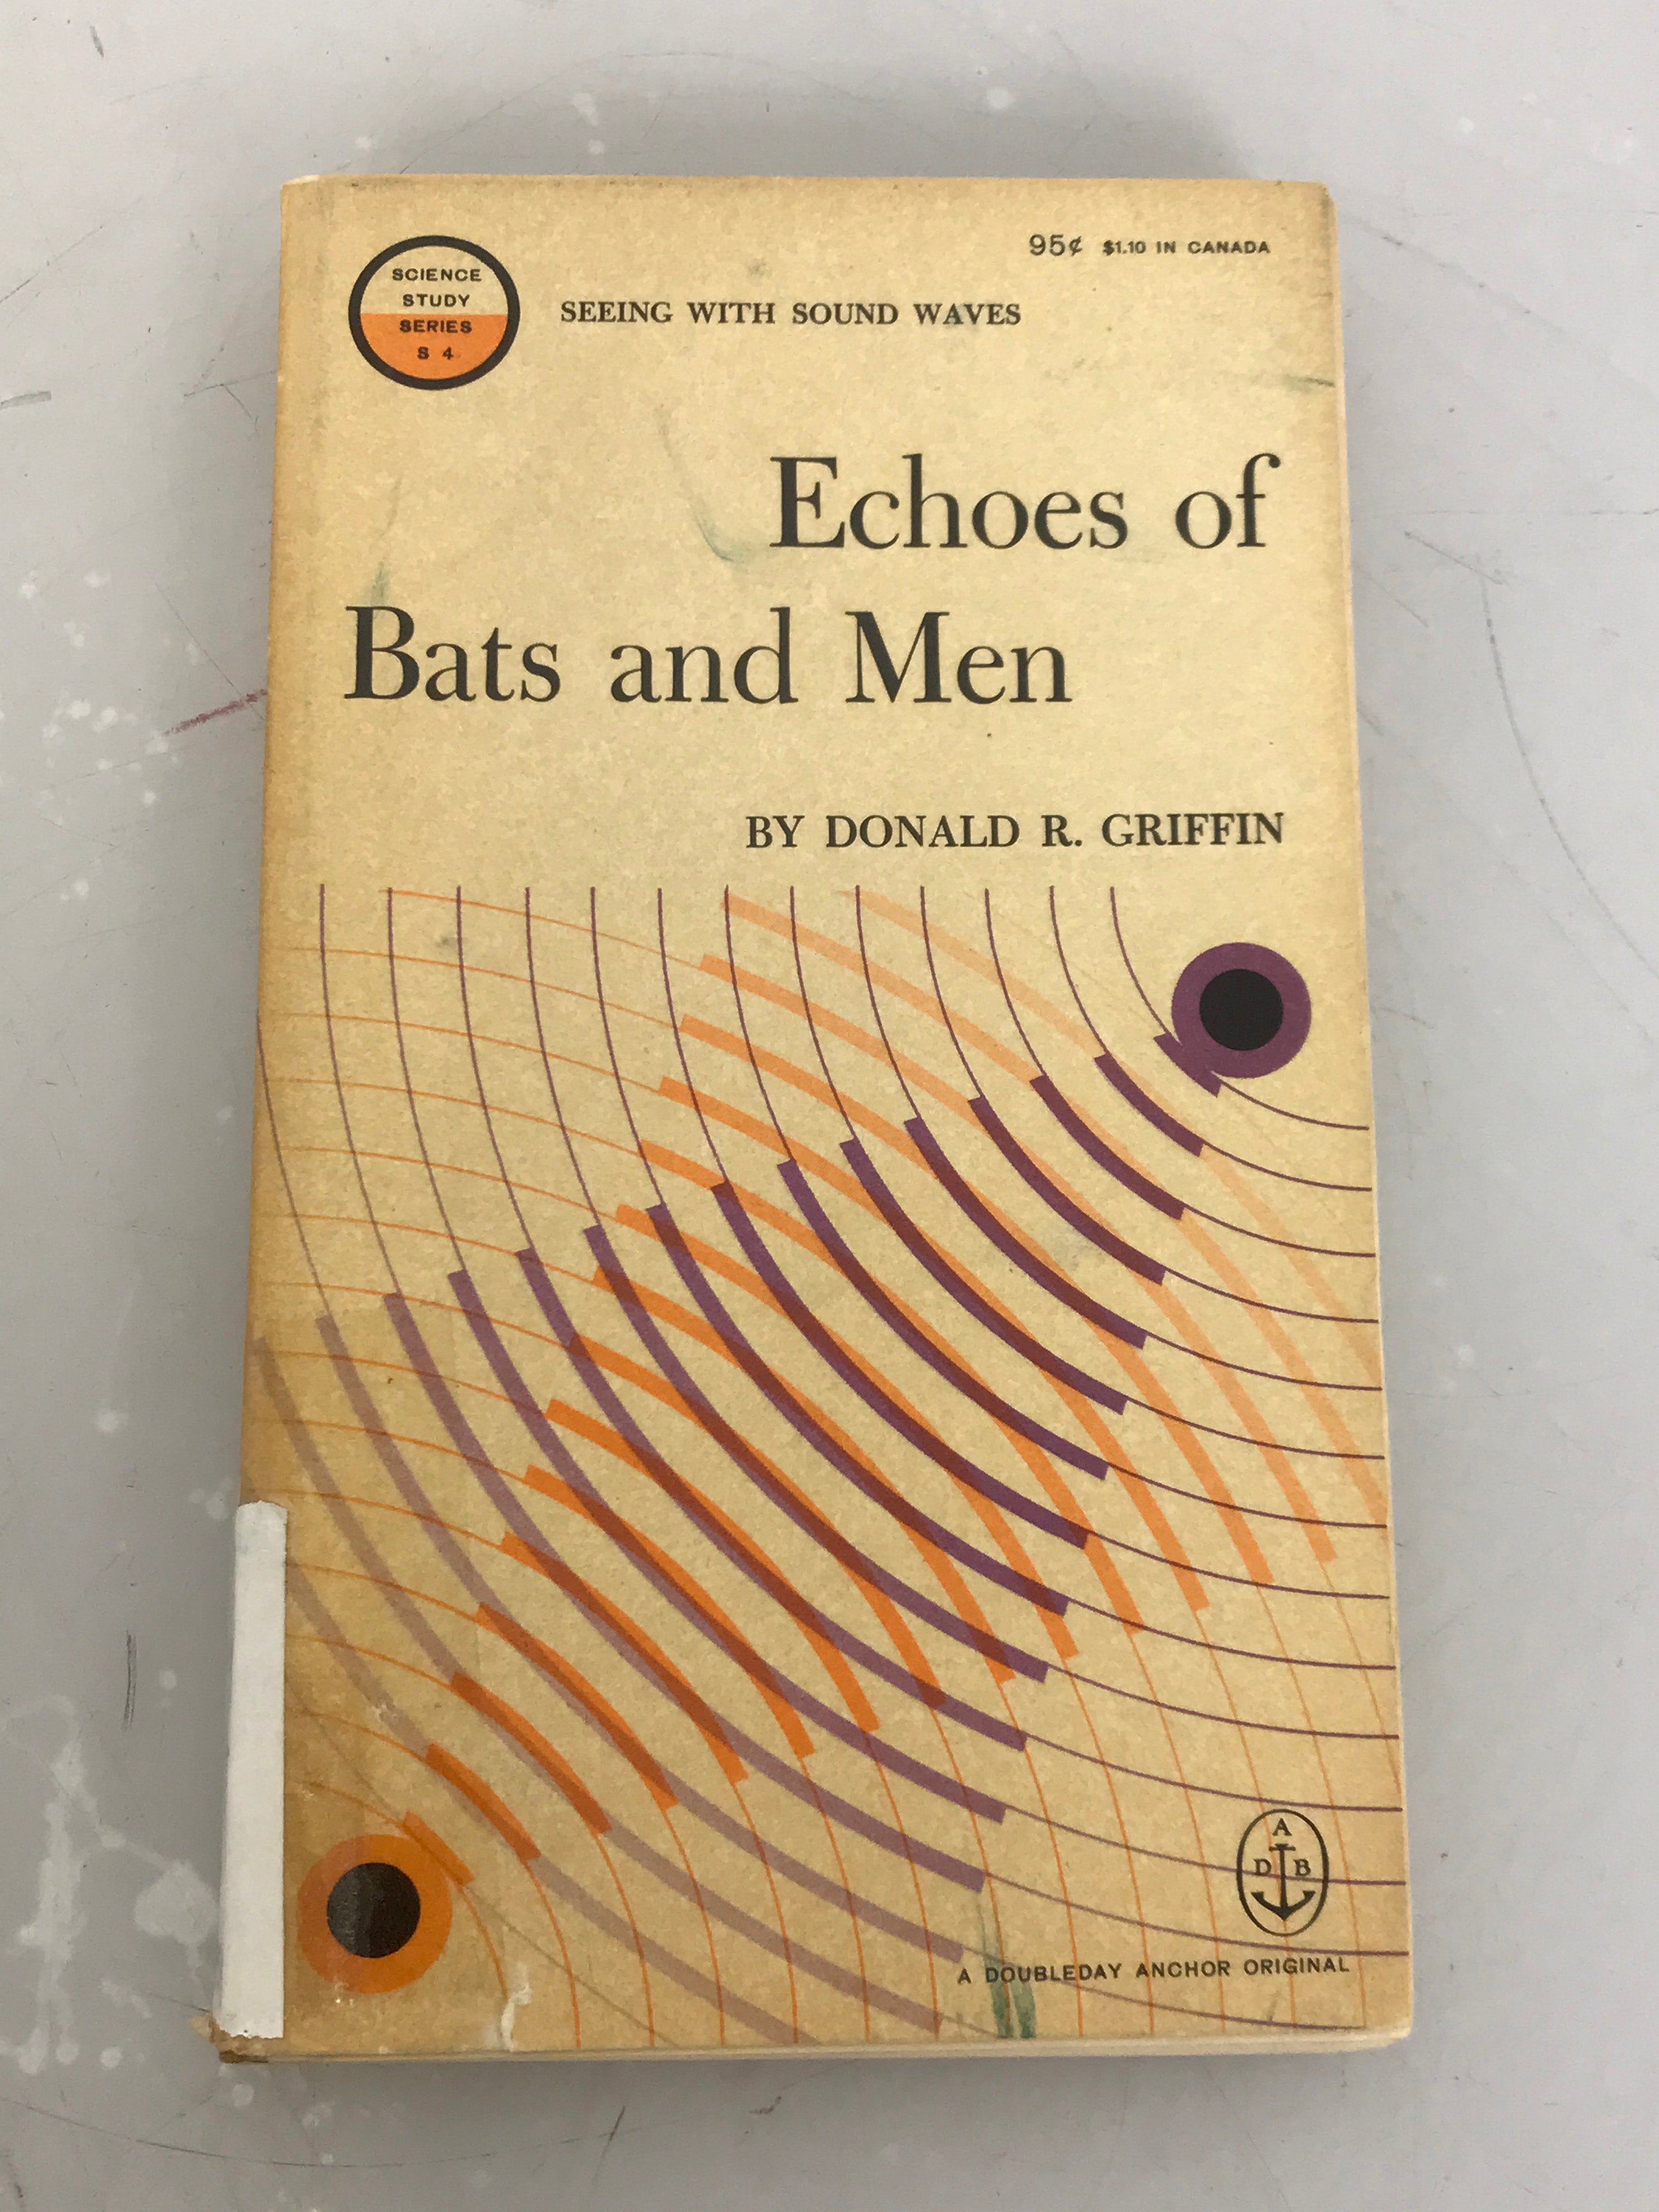 Echoes of Bats and Men by Donald R. Griffin 1959 SC